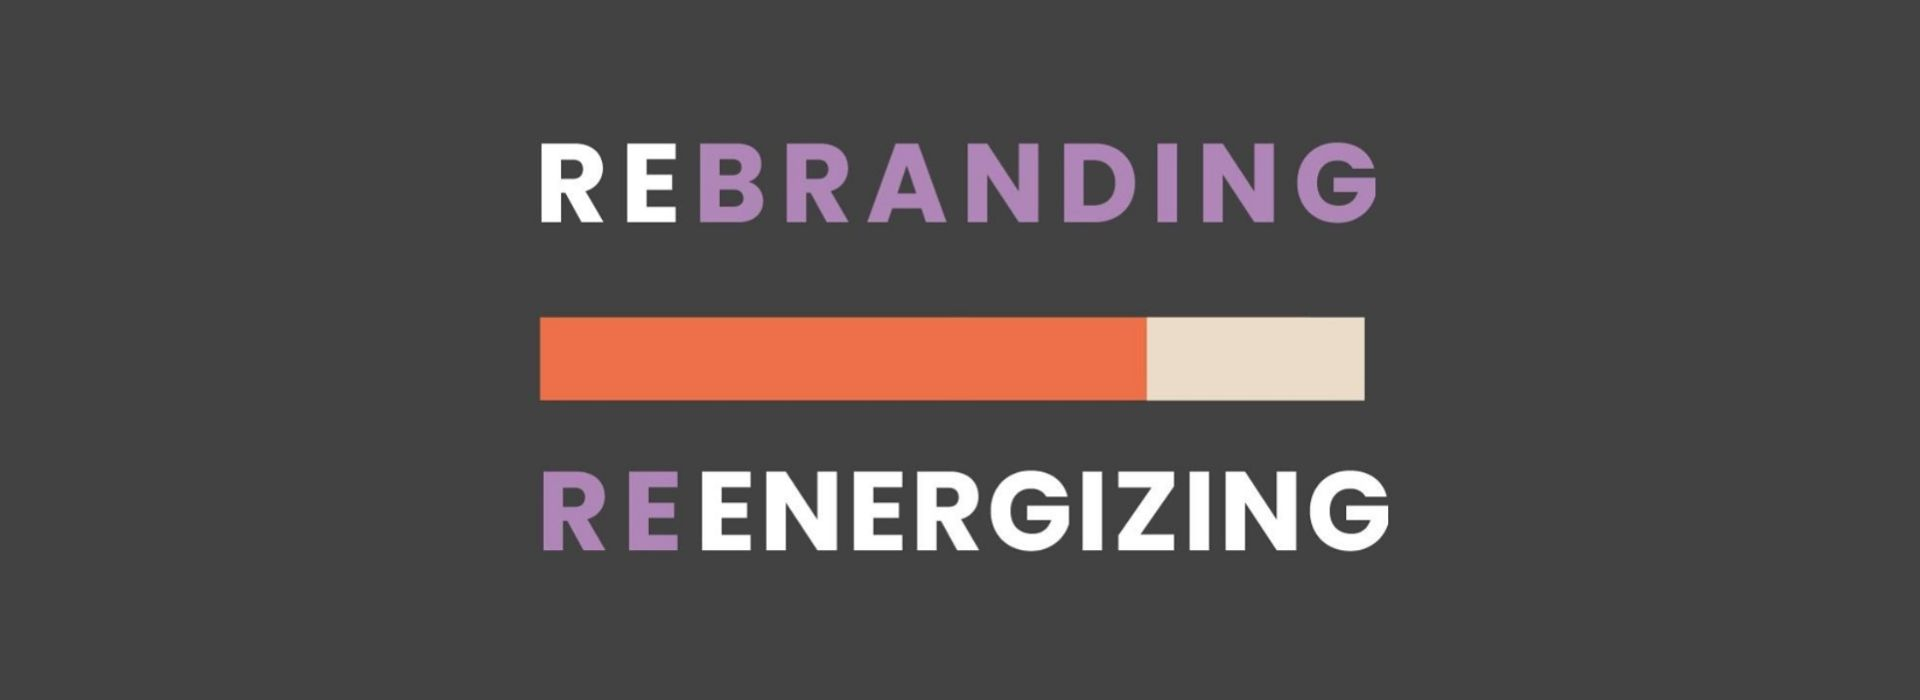 Wico Lab Banner that says "Re branding Re energizing"